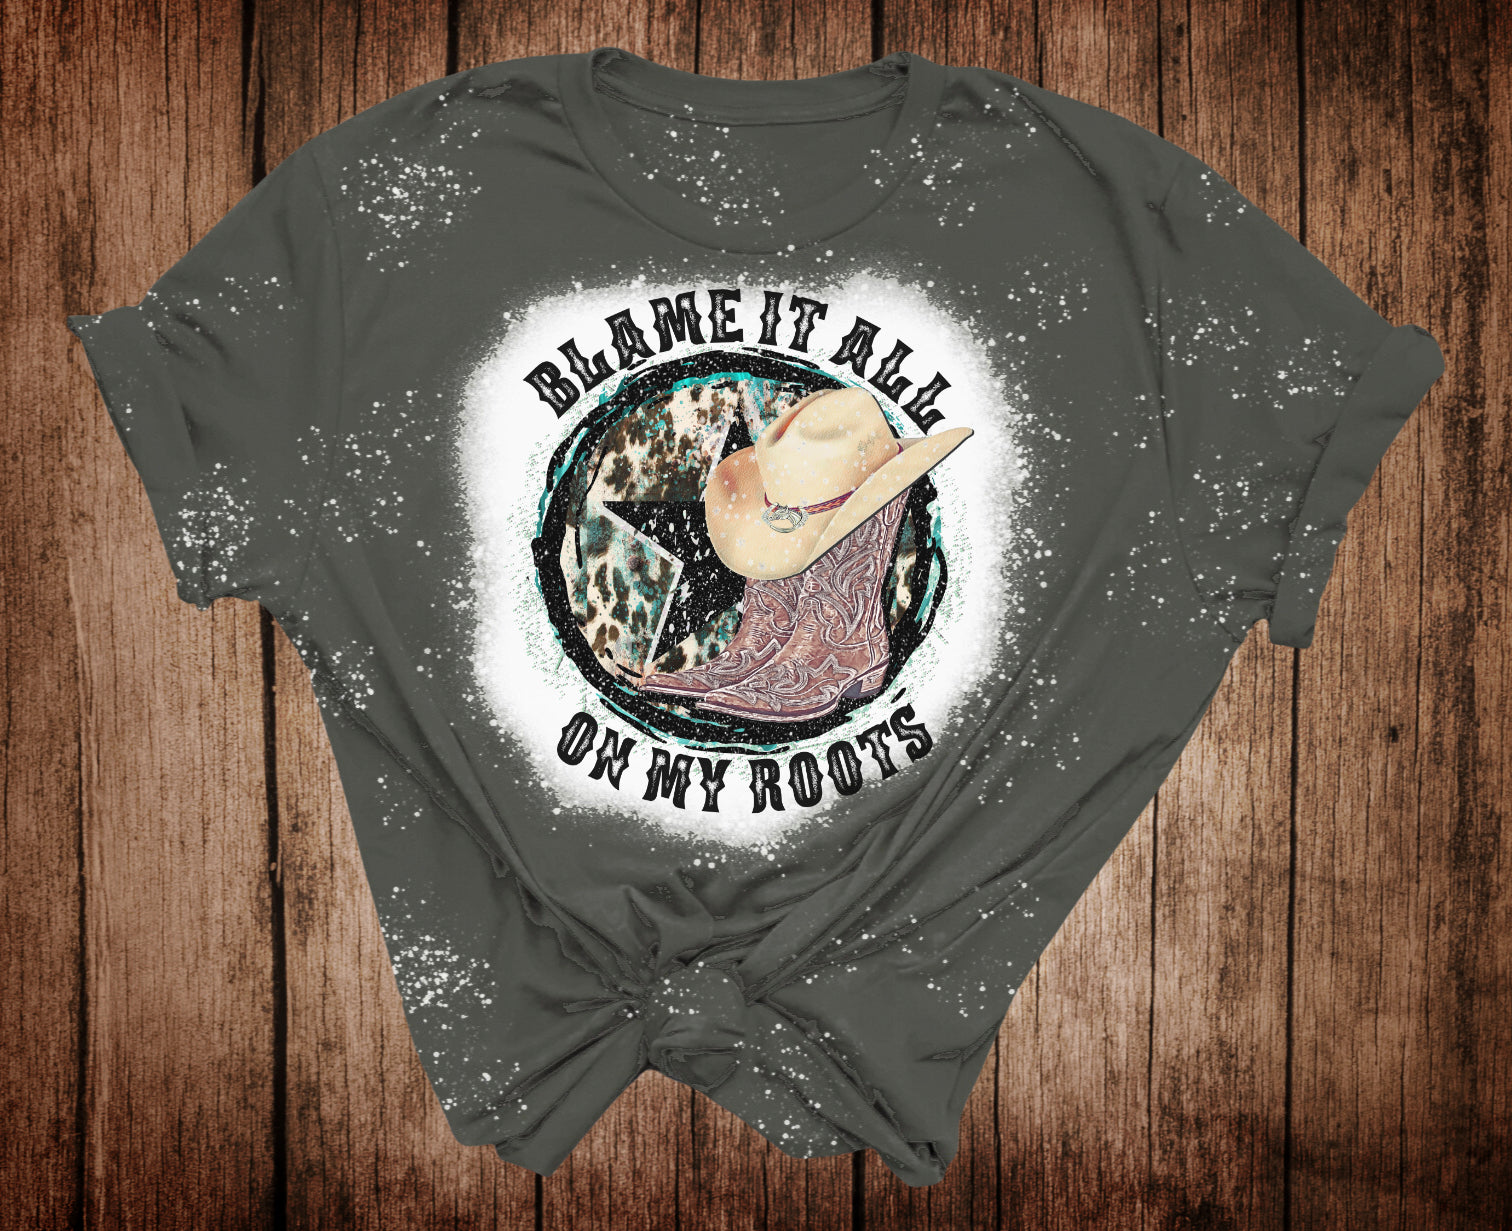 Blame It All On My Roots Bleached Short Sleeve T-Shirt